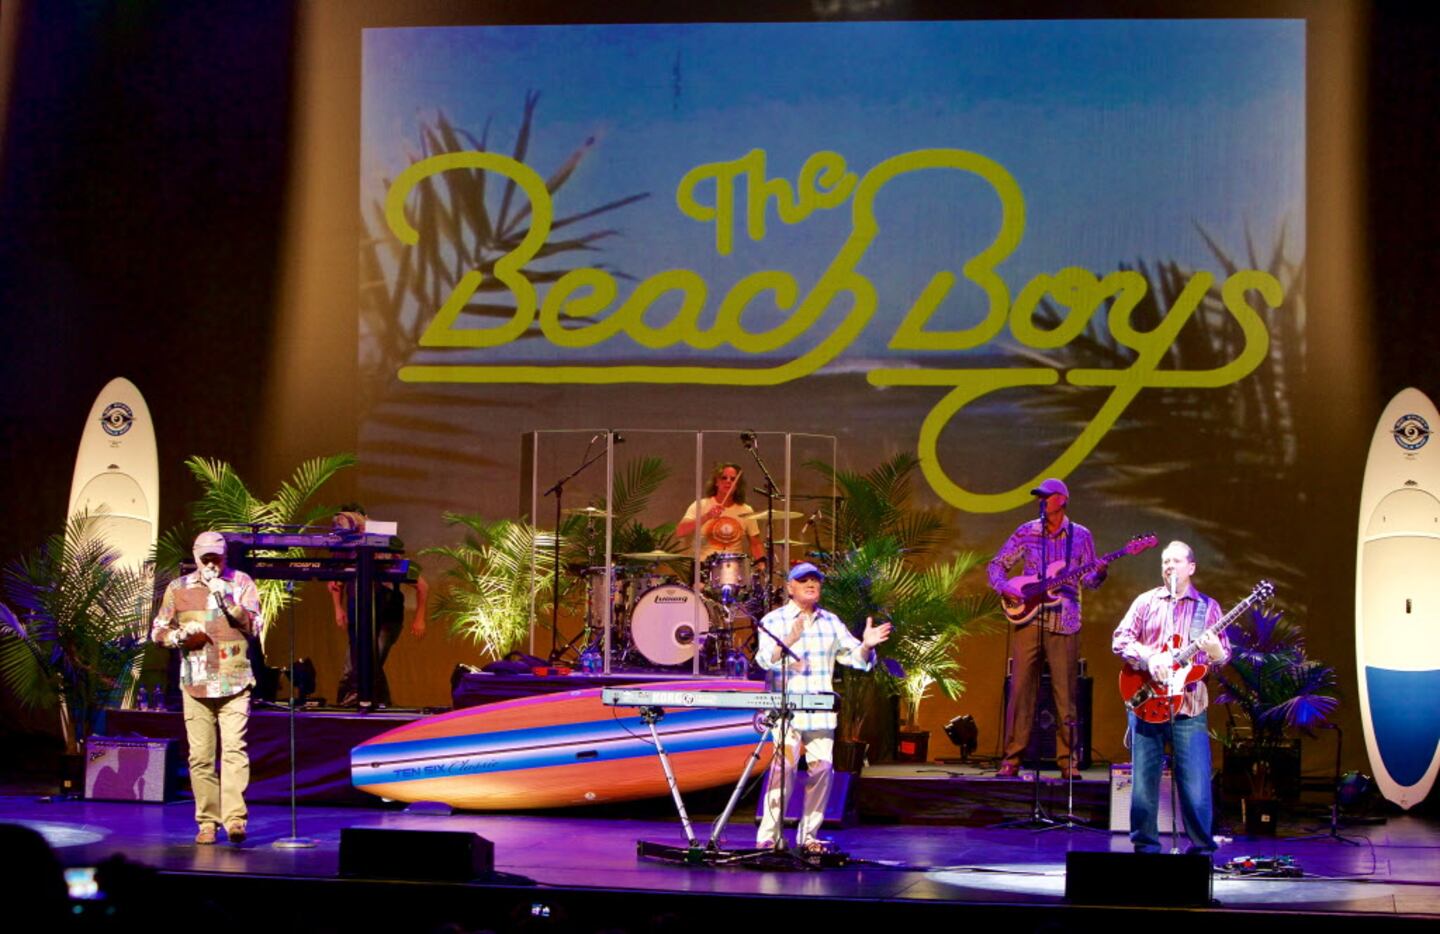 Mike Love, left, and Alan Jardine, on the keyboard, of The Beach Boys perform at Verizon...